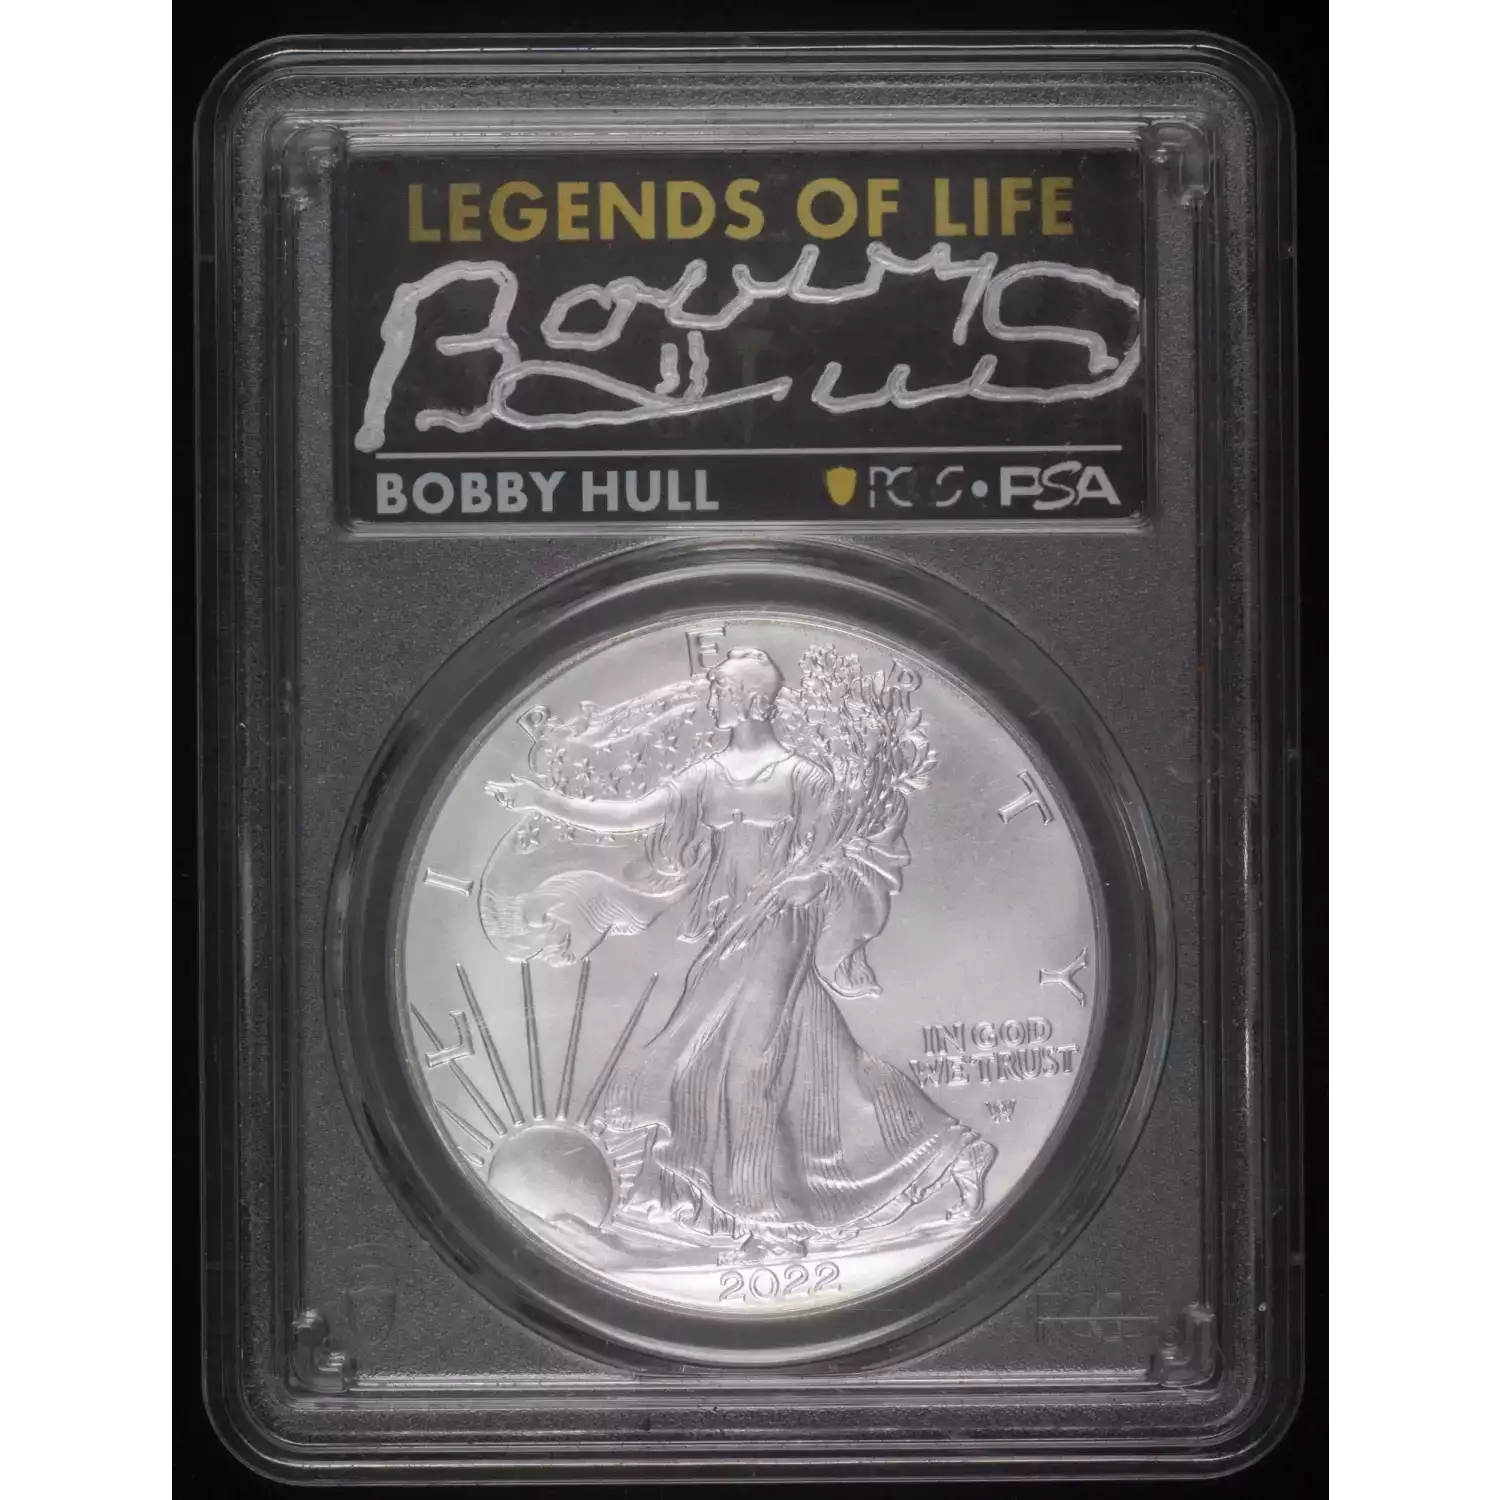 2022 $1 Silver Eagle Legends of Life First Strike Bobby Hull Bobby Hull (2)